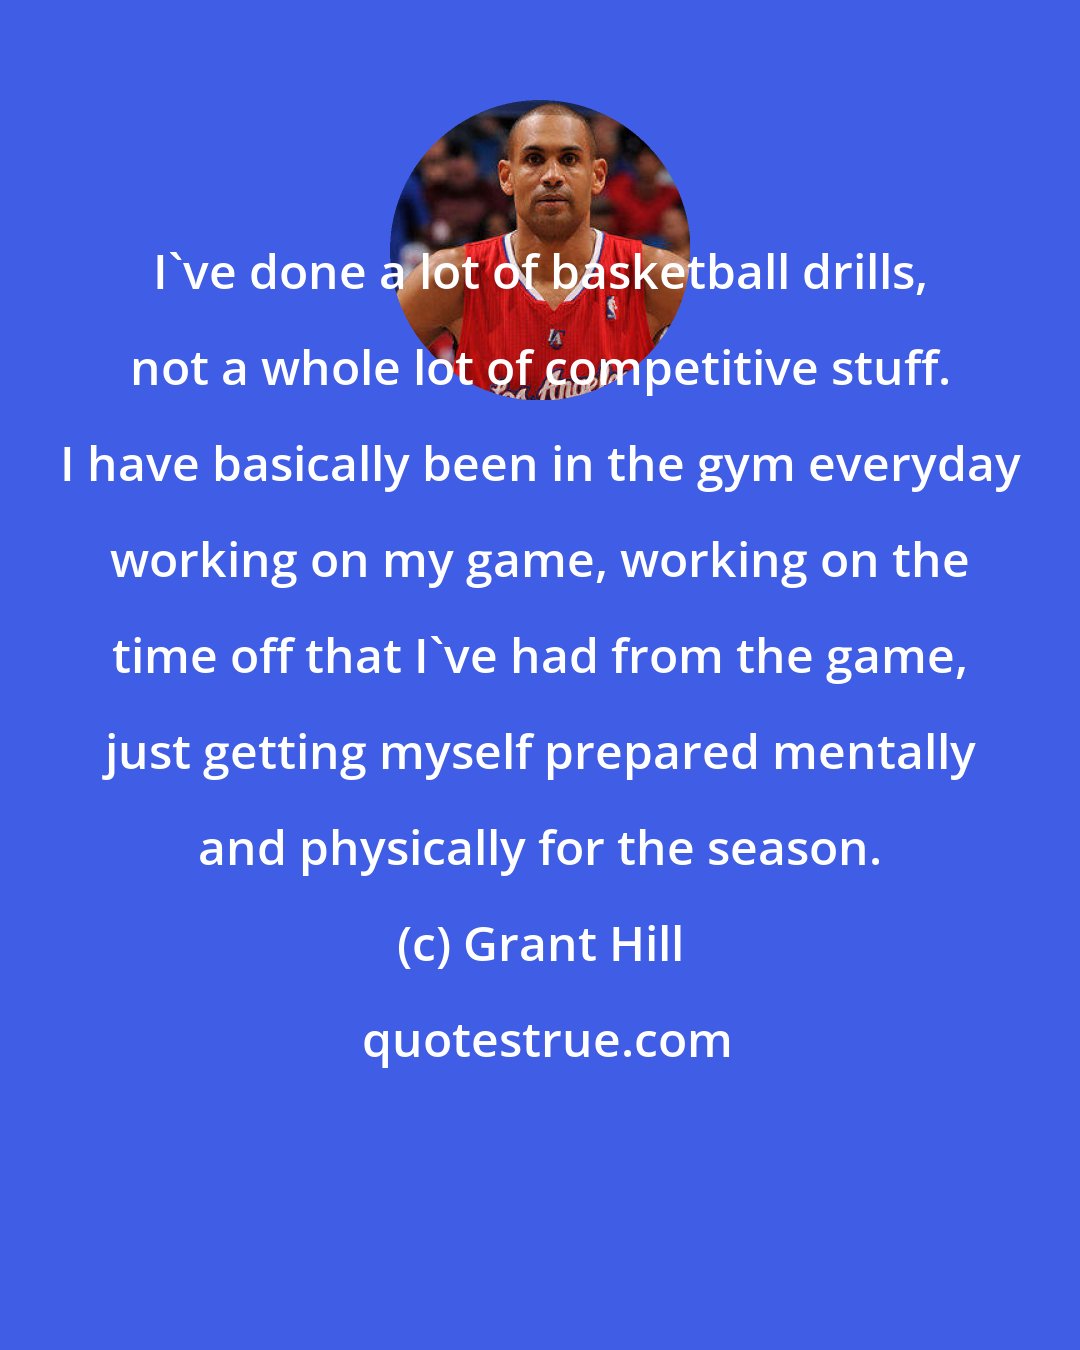 Grant Hill: I've done a lot of basketball drills, not a whole lot of competitive stuff. I have basically been in the gym everyday working on my game, working on the time off that I've had from the game, just getting myself prepared mentally and physically for the season.